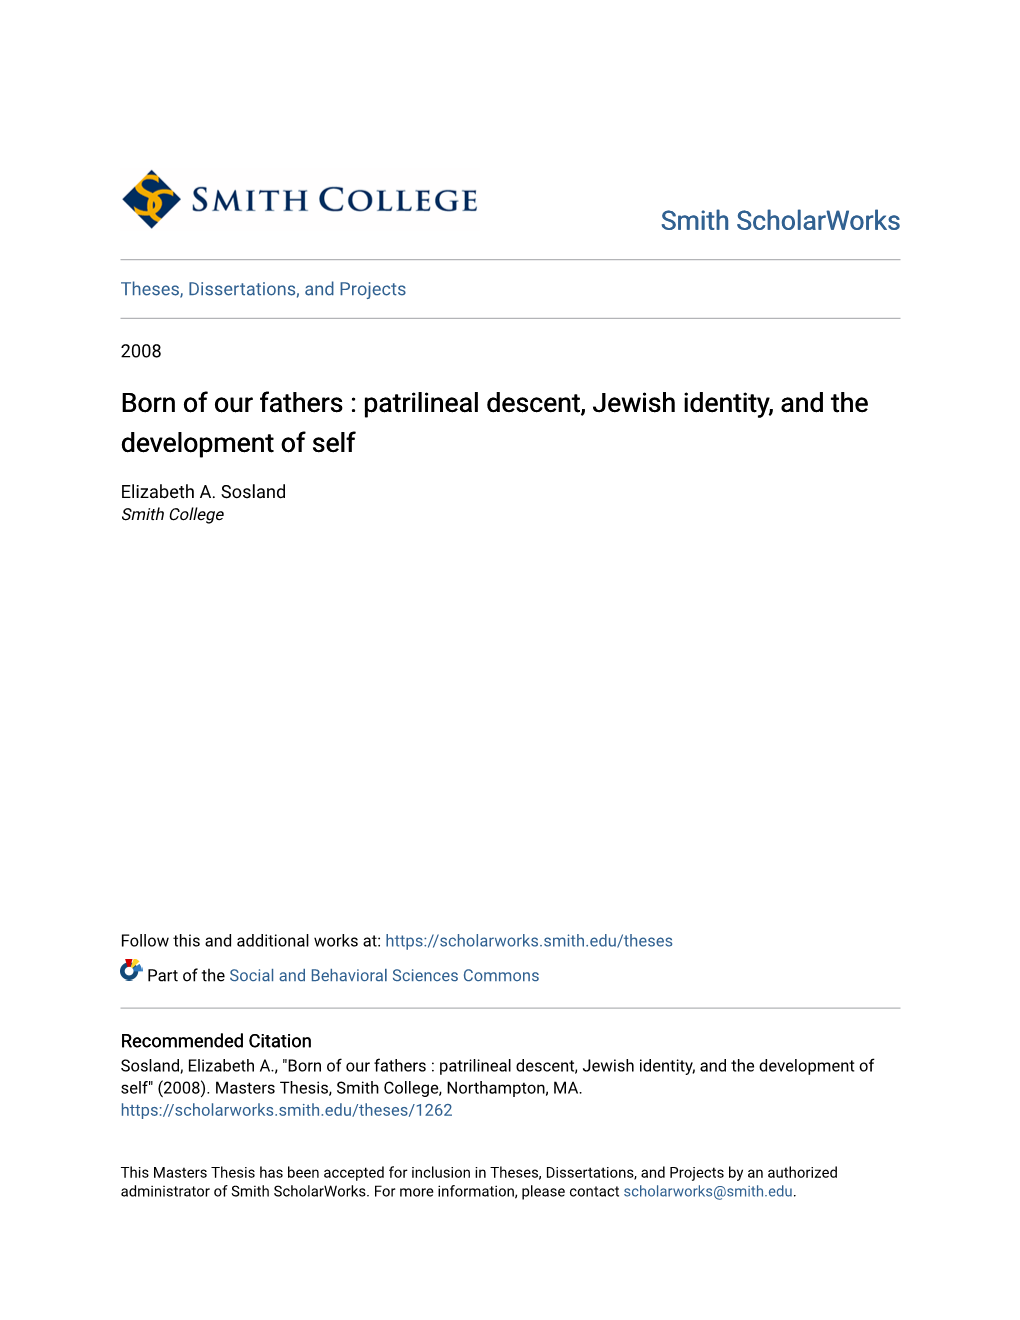 Born of Our Fathers : Patrilineal Descent, Jewish Identity, and the Development of Self